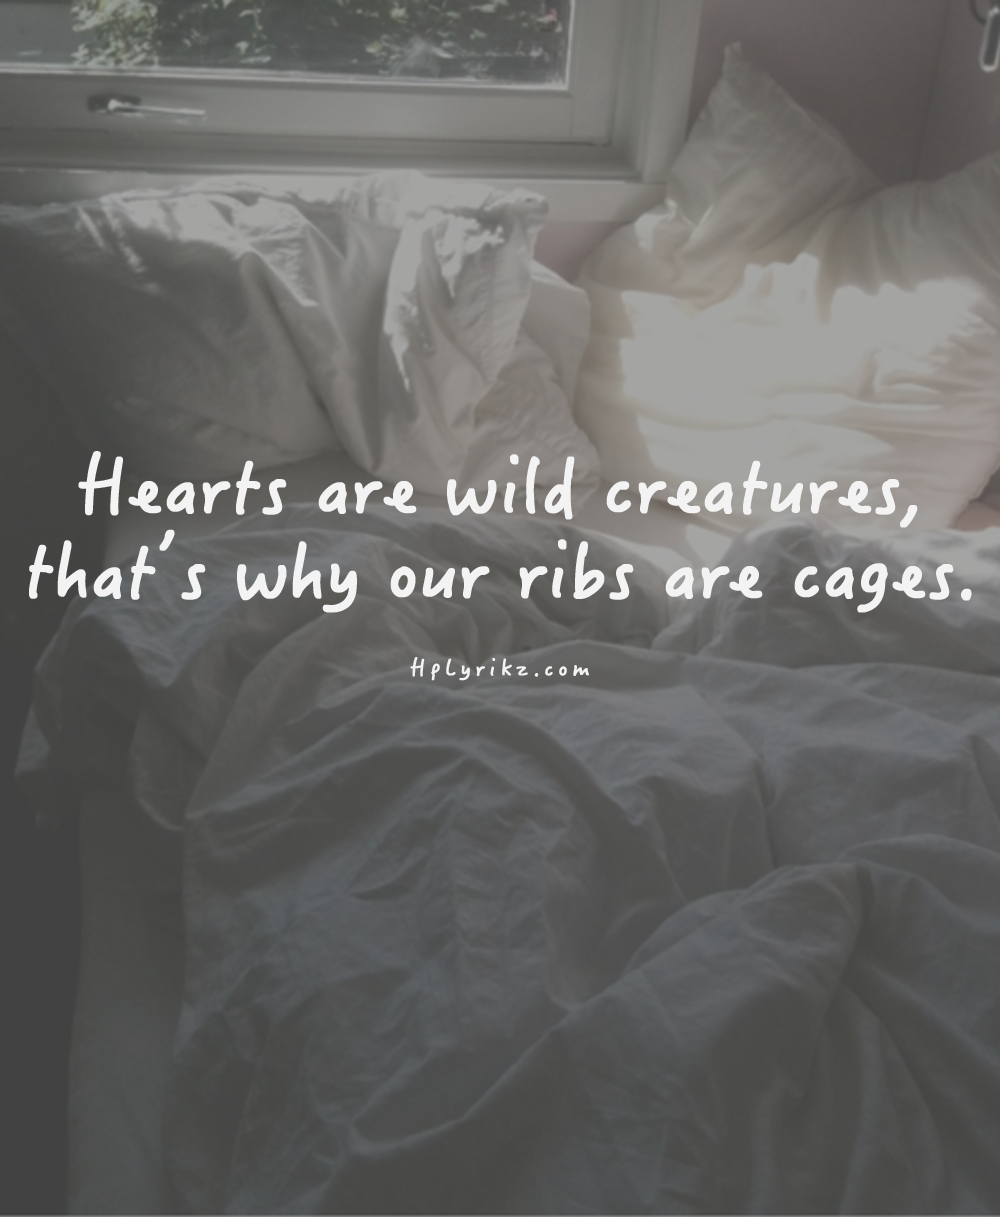 Hearts are wild creatures, thats why our ribs are cages